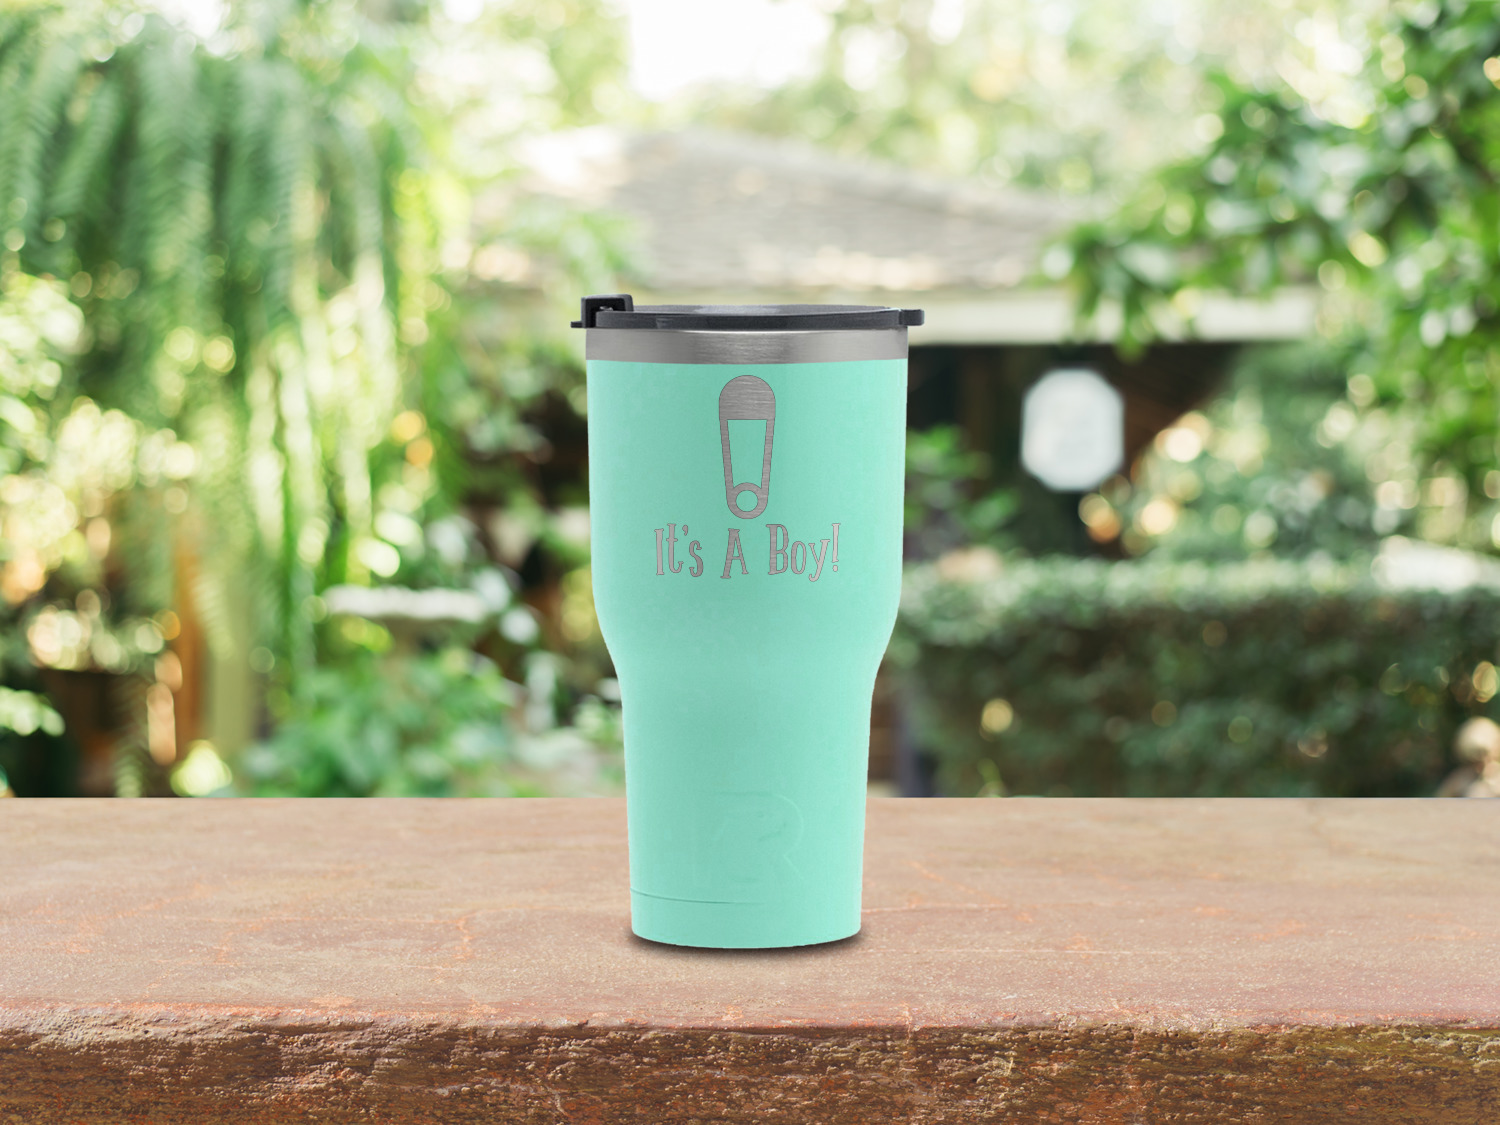 https://www.youcustomizeit.com/common/MAKE/1070461/Baby-Shower-Teal-RTIC-Tumbler-Lifestyle-Front.jpg?lm=1628728752